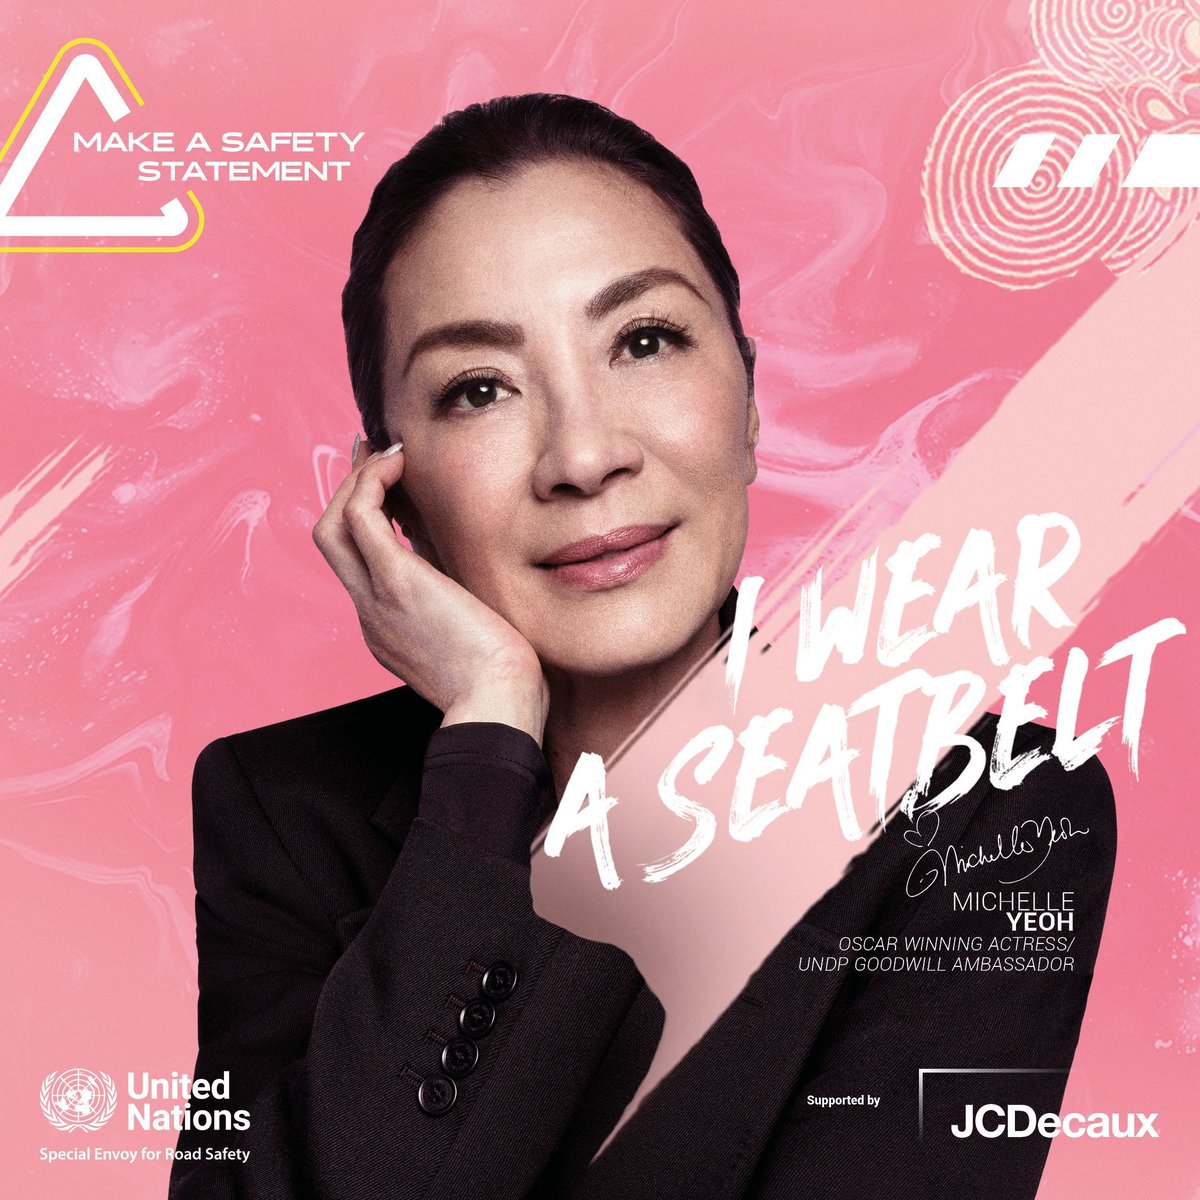 ⏲️ In #AsiaPacific, one person dies in a road crash every 38 seconds! 🏍️ @UN's global campaign for road safety aims to prevent at least 50% of road traffic deaths & injuries by 2030. Follow the lead of Michelle Yeoh & #MakeASafetyStatement ➡️ bit.ly/3Q5K2Vy @JeanTodt